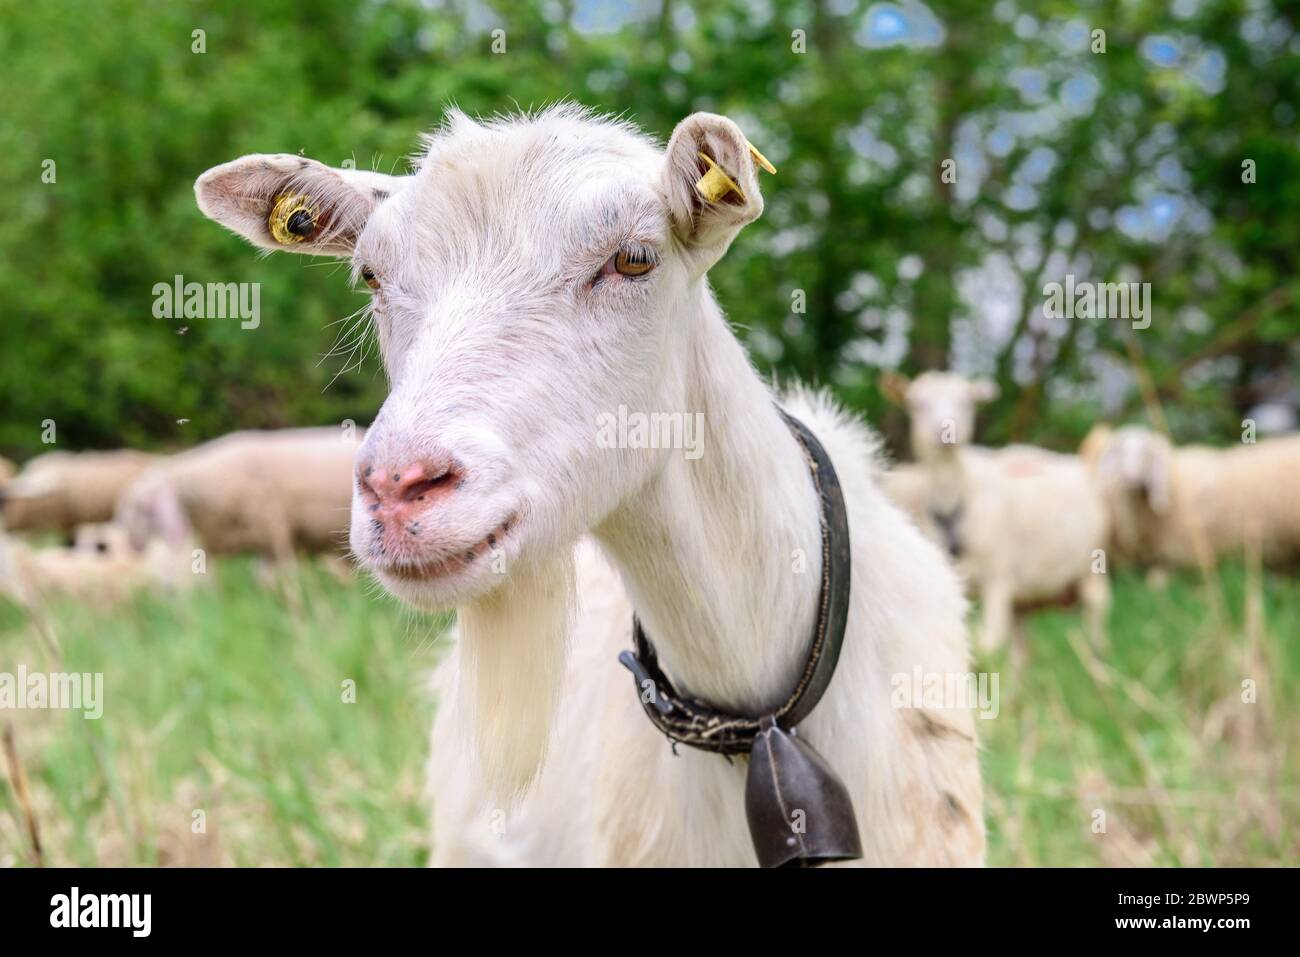 A horned goat posing for a photo. At the bottom of the image is the clay floor with a wooden fence, green grass and some trees Stock Photo